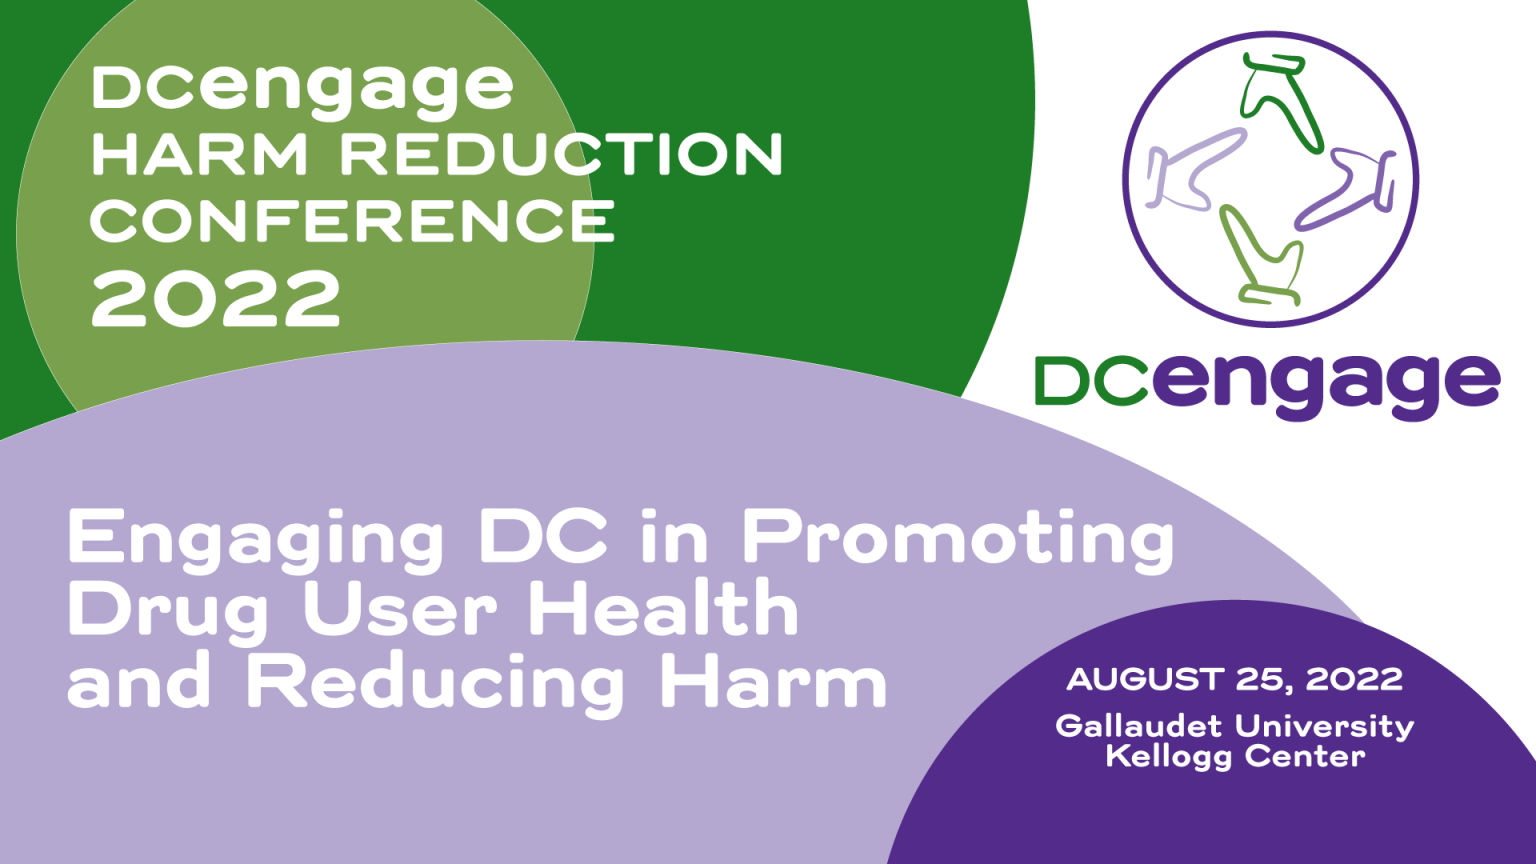 Inaugural DC Engage Harm Reduction Conference 2022 HealthHIV